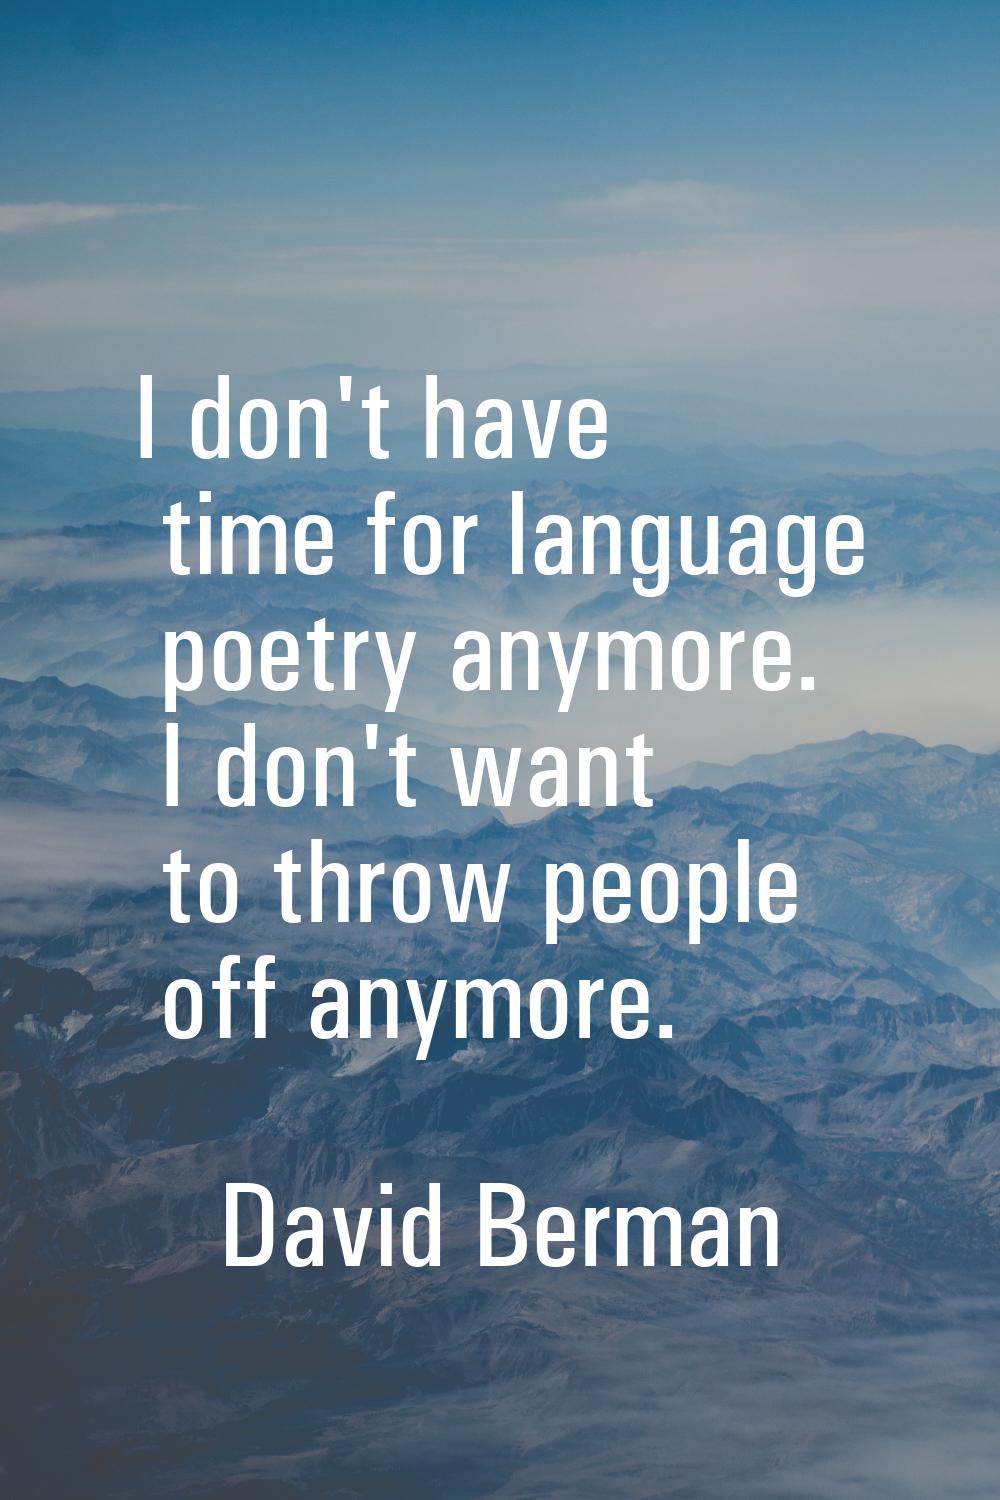 I don't have time for language poetry anymore. I don't want to throw people off anymore.